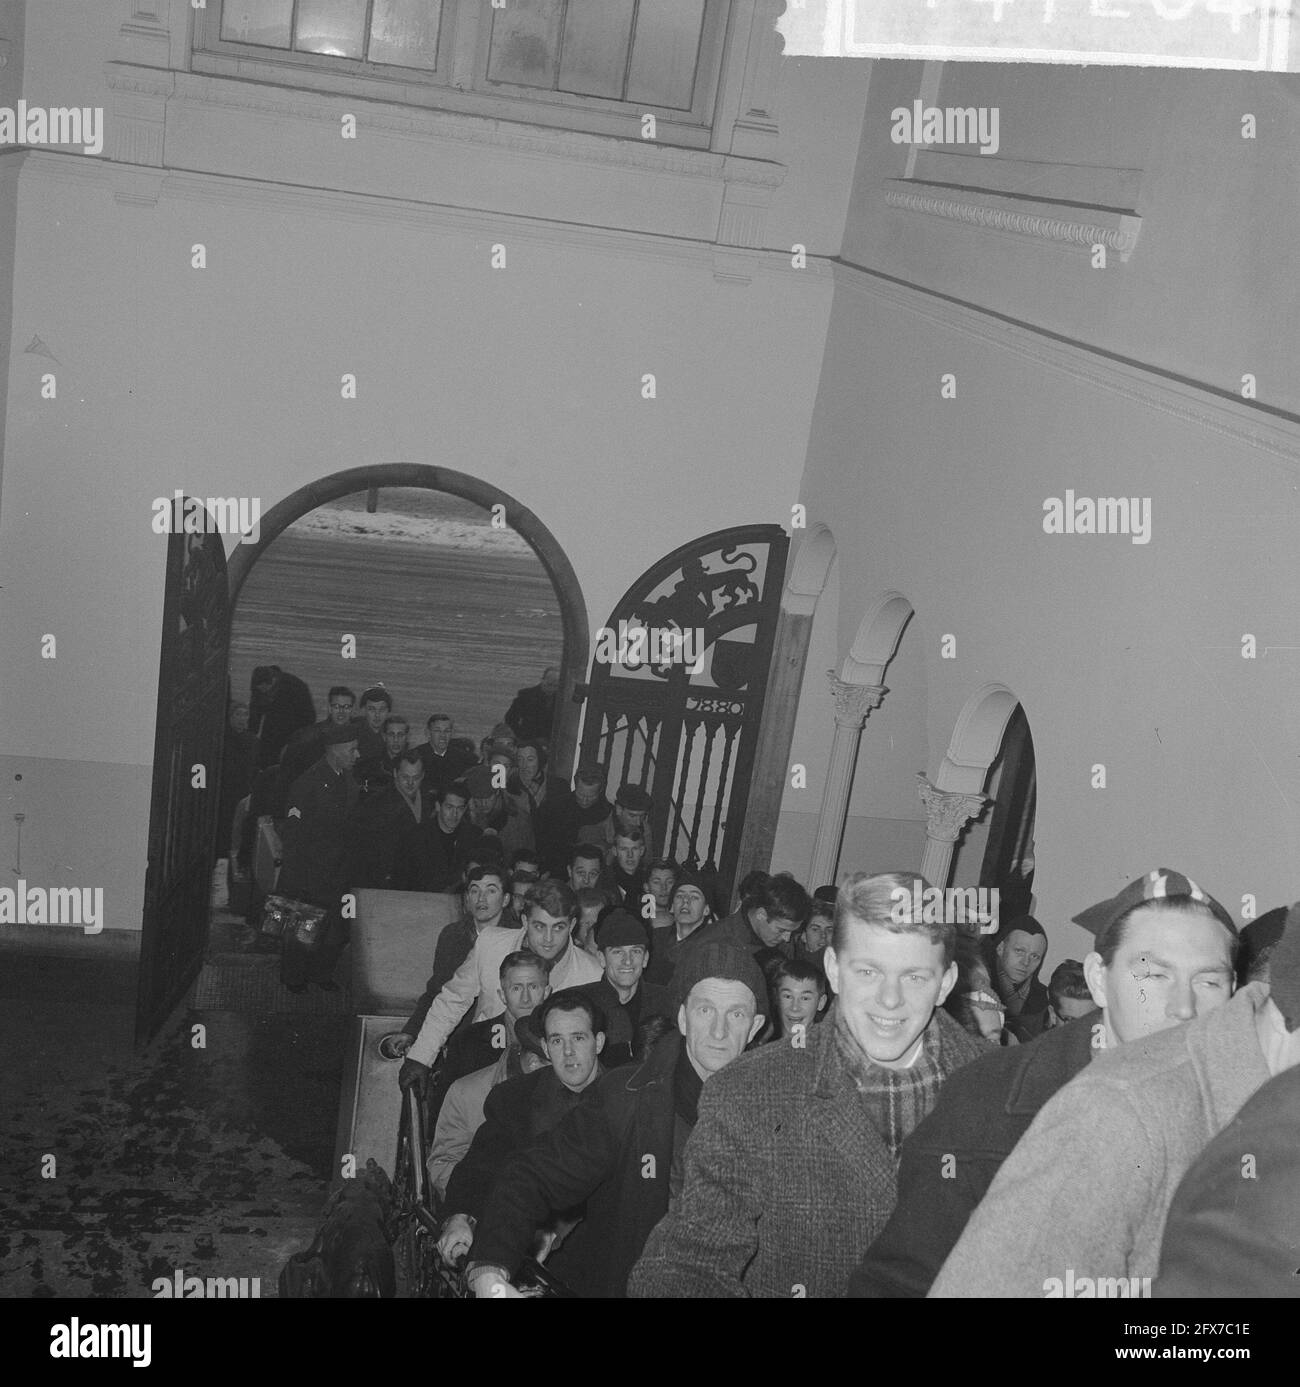 Registration for the Elfstedentocht in the Leeuwarden Stock Exchange, 17 January 1963, participants, skating, sports, The Netherlands, 20th century press agency photo, news to remember, documentary, historic photography 1945-1990, visual stories, human history of the Twentieth Century, capturing moments in time Stock Photo